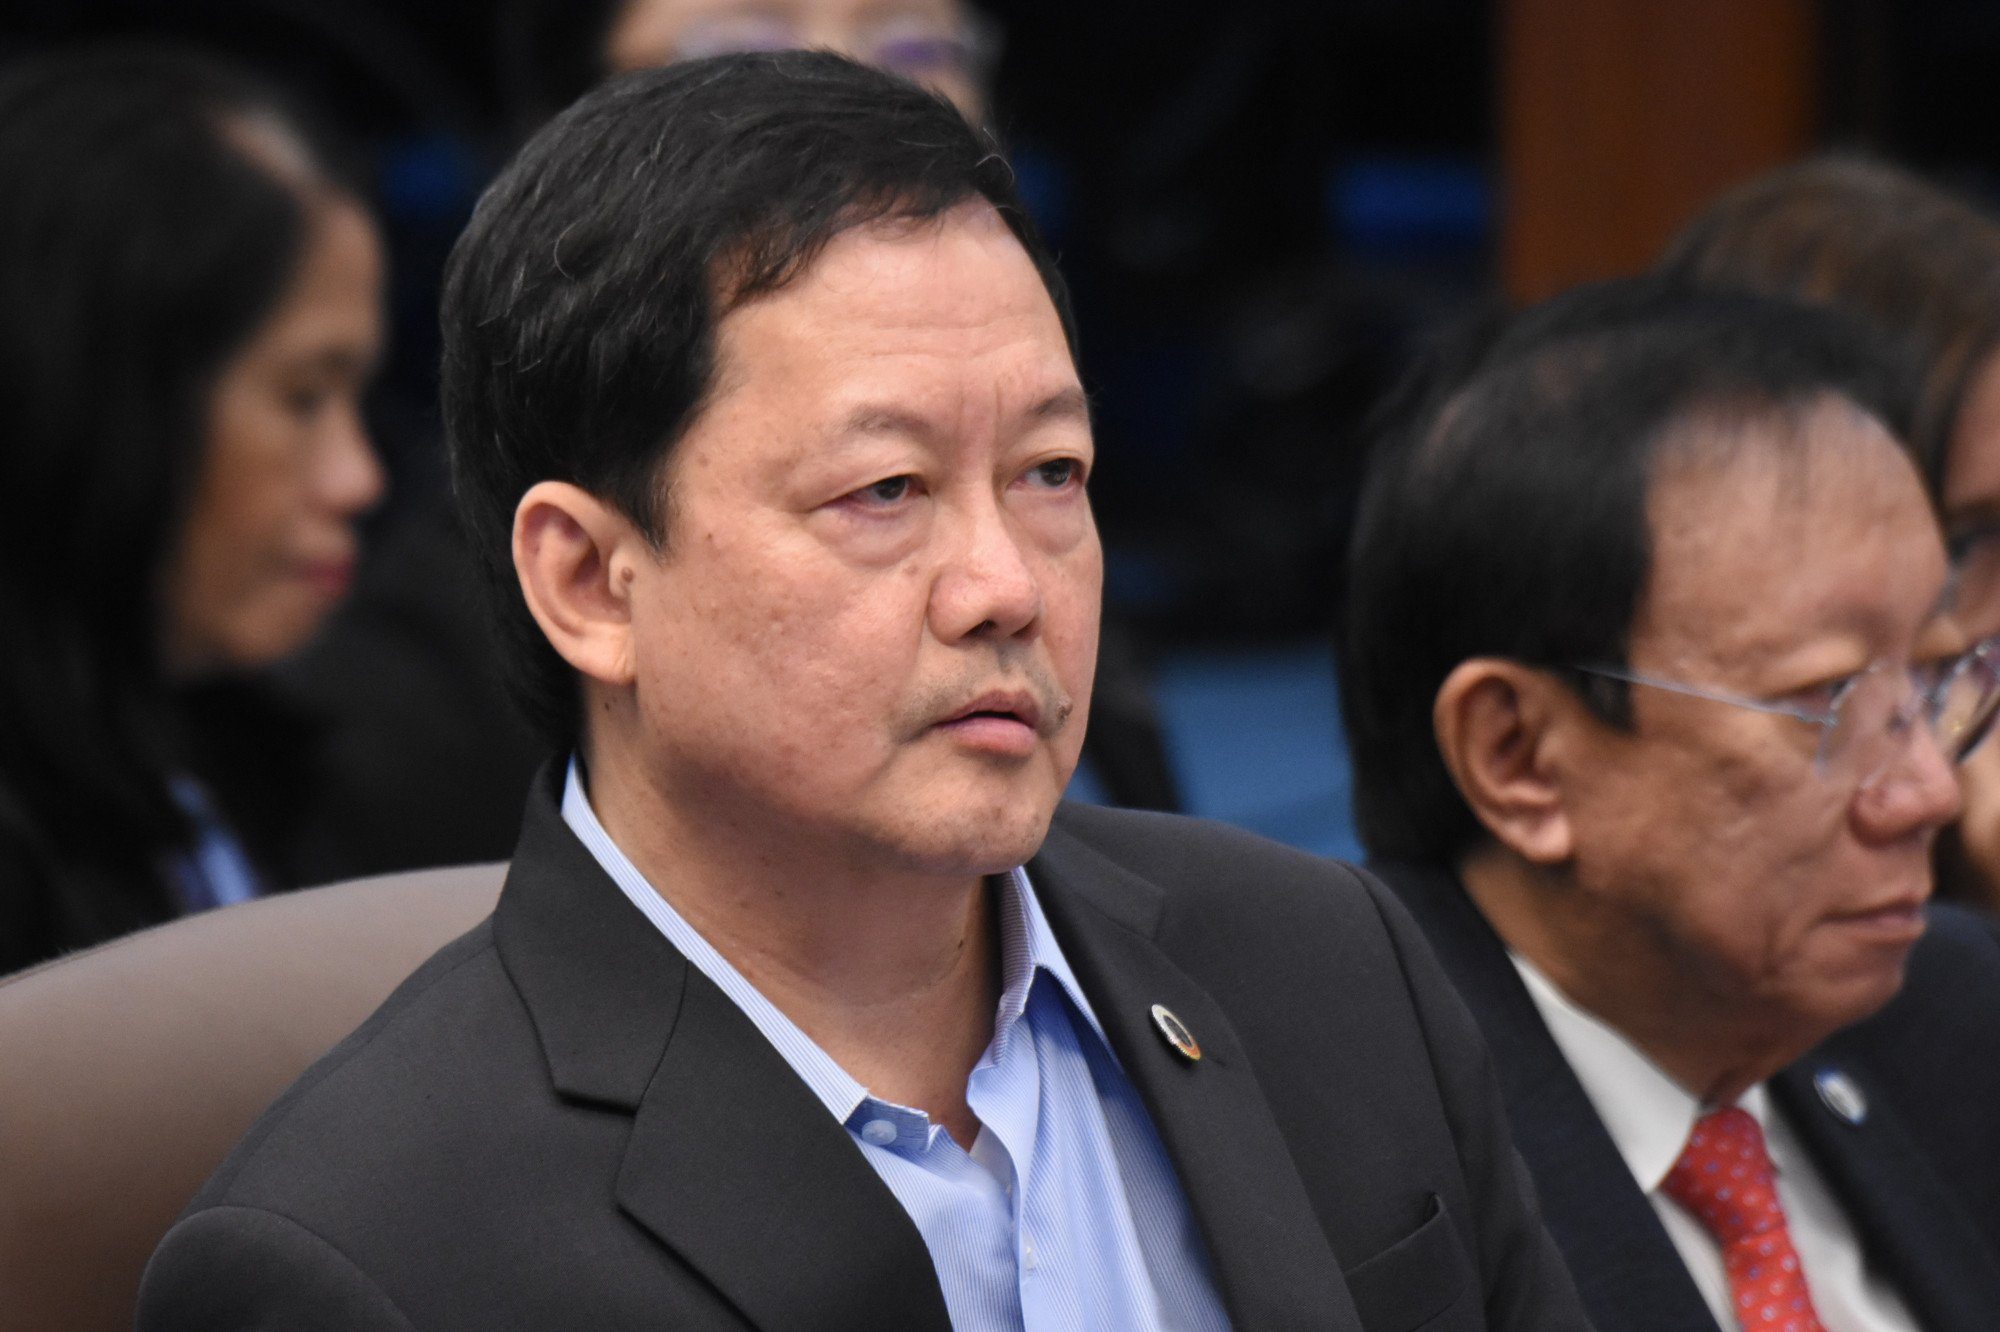 After Calida, Guevarra is now highest paid solicitor general